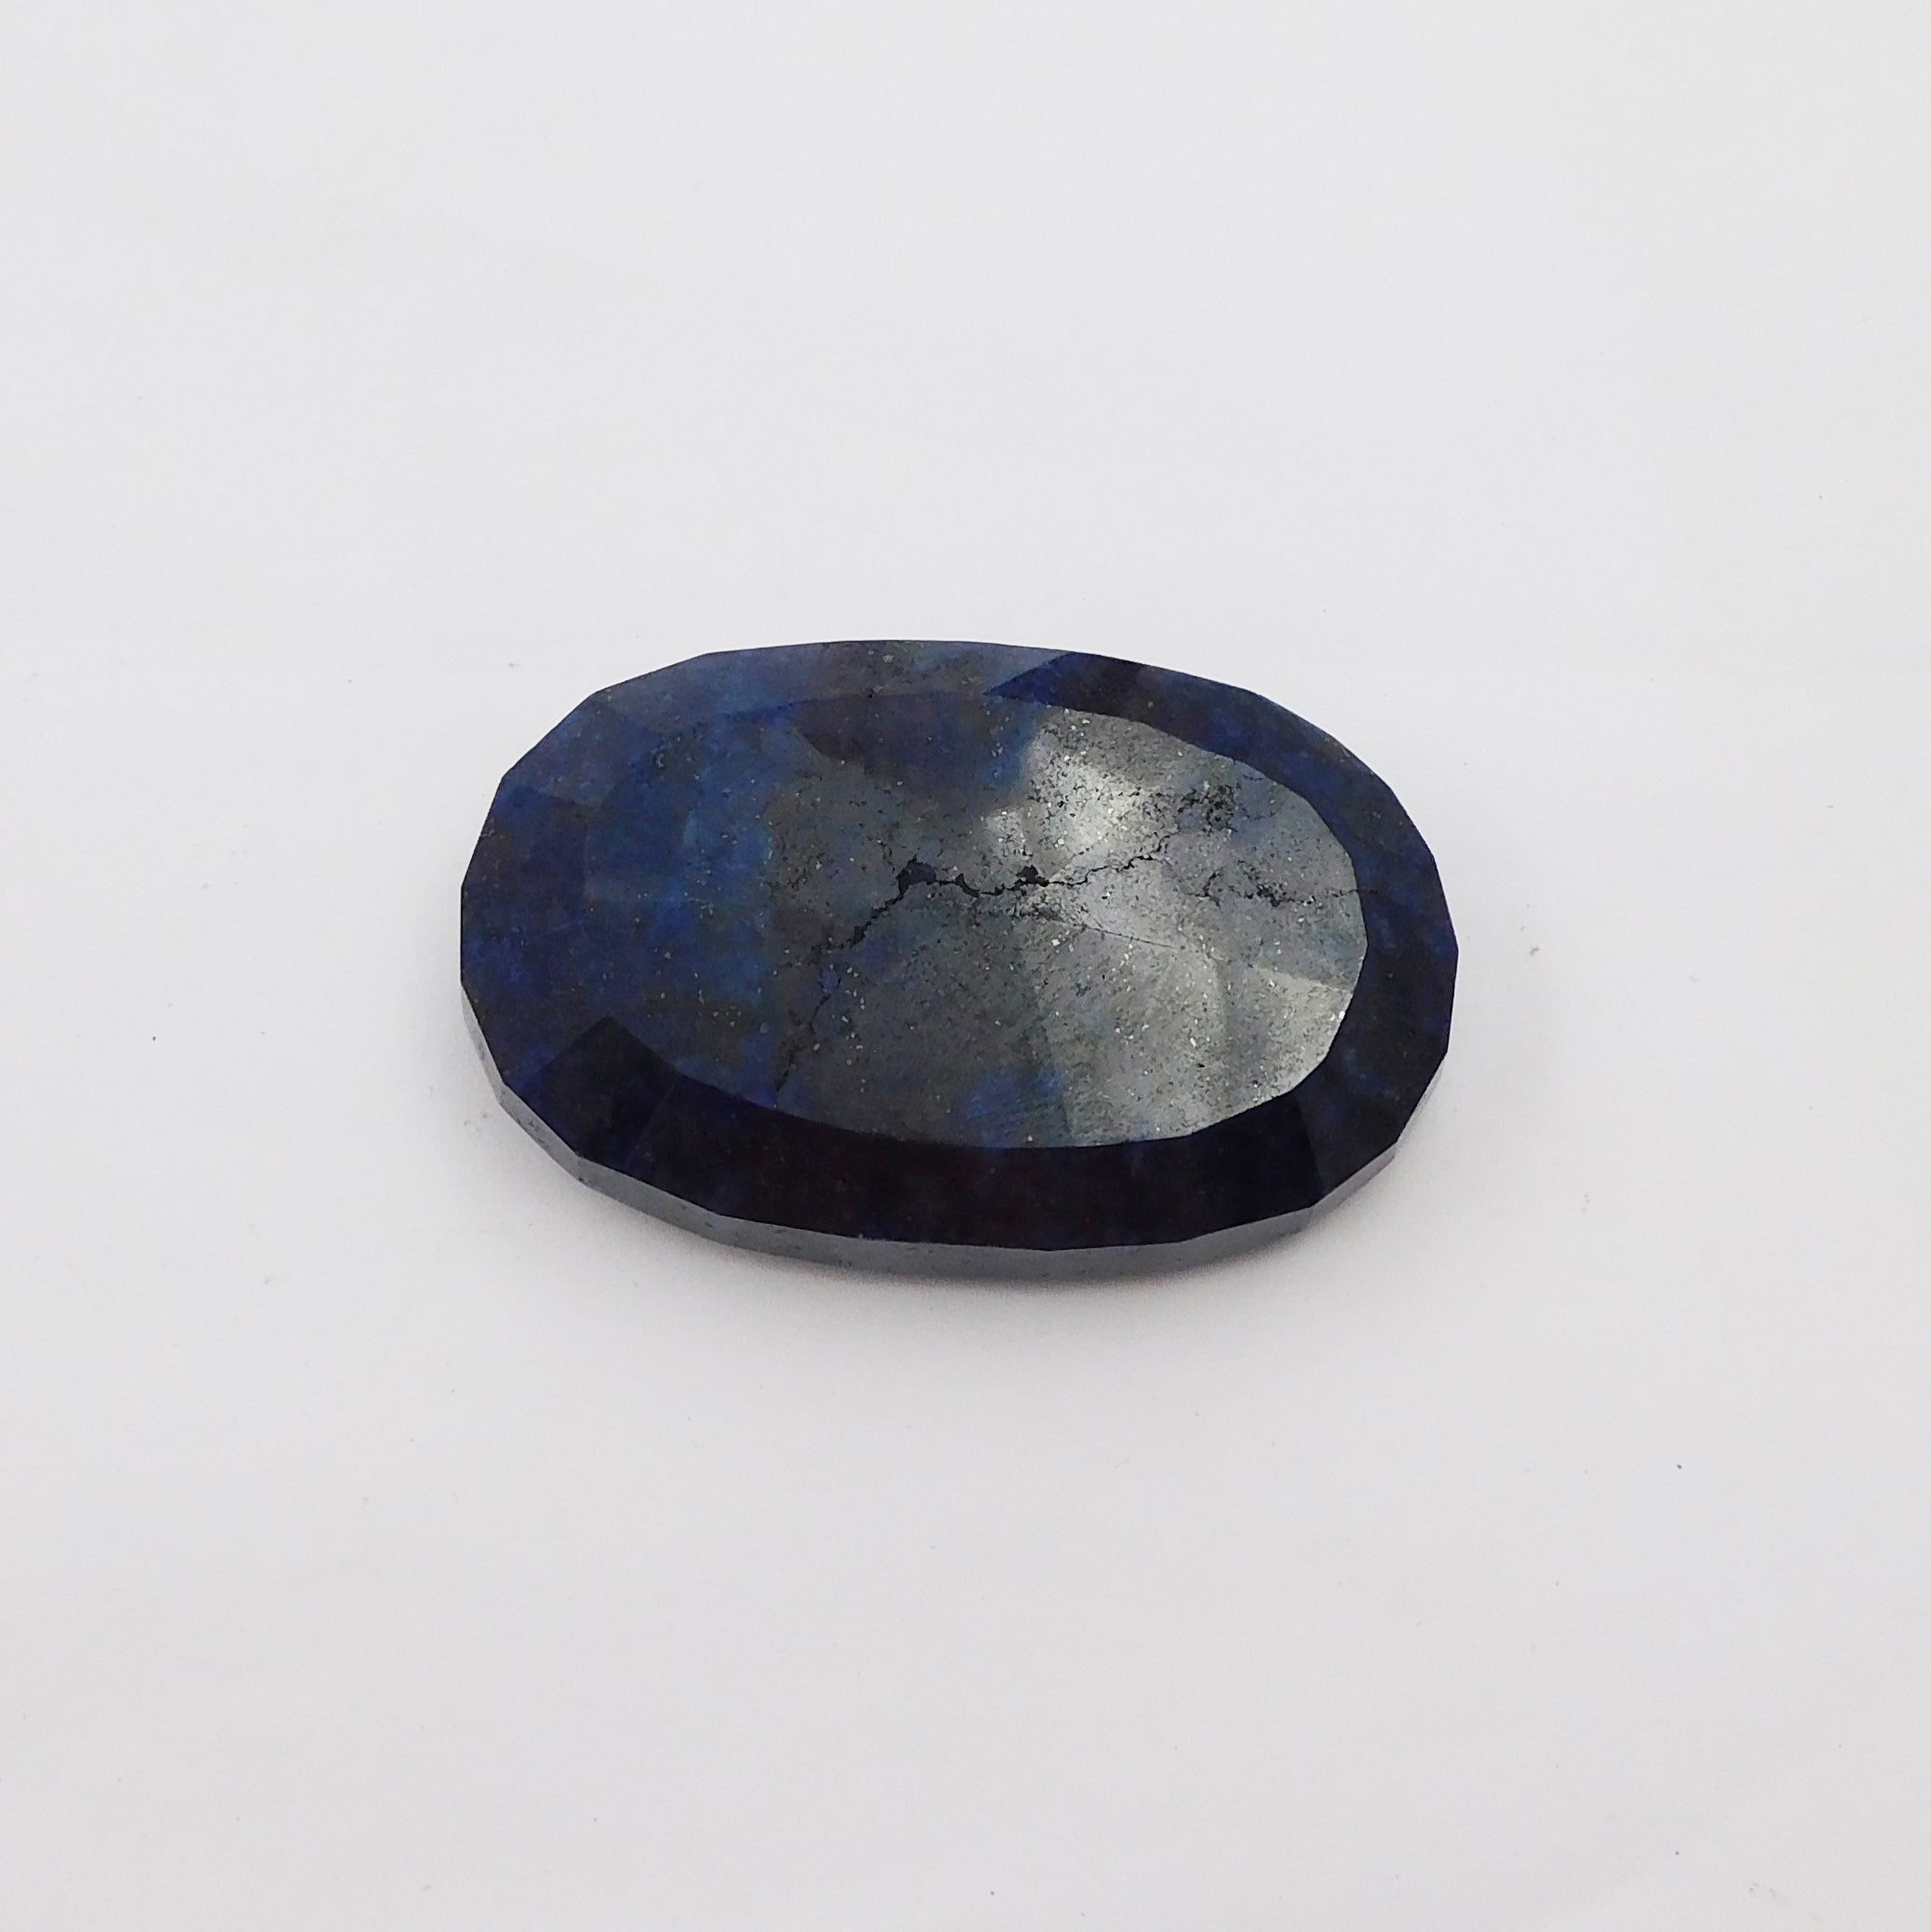 Unique Quality Exclusive Rare Collection Sapphire 540.60 Carat Blue Sapphire Stone faceted Oval Shape Stone Certified Natural Loose Gemstone Sapphire Help to bring good luck and success